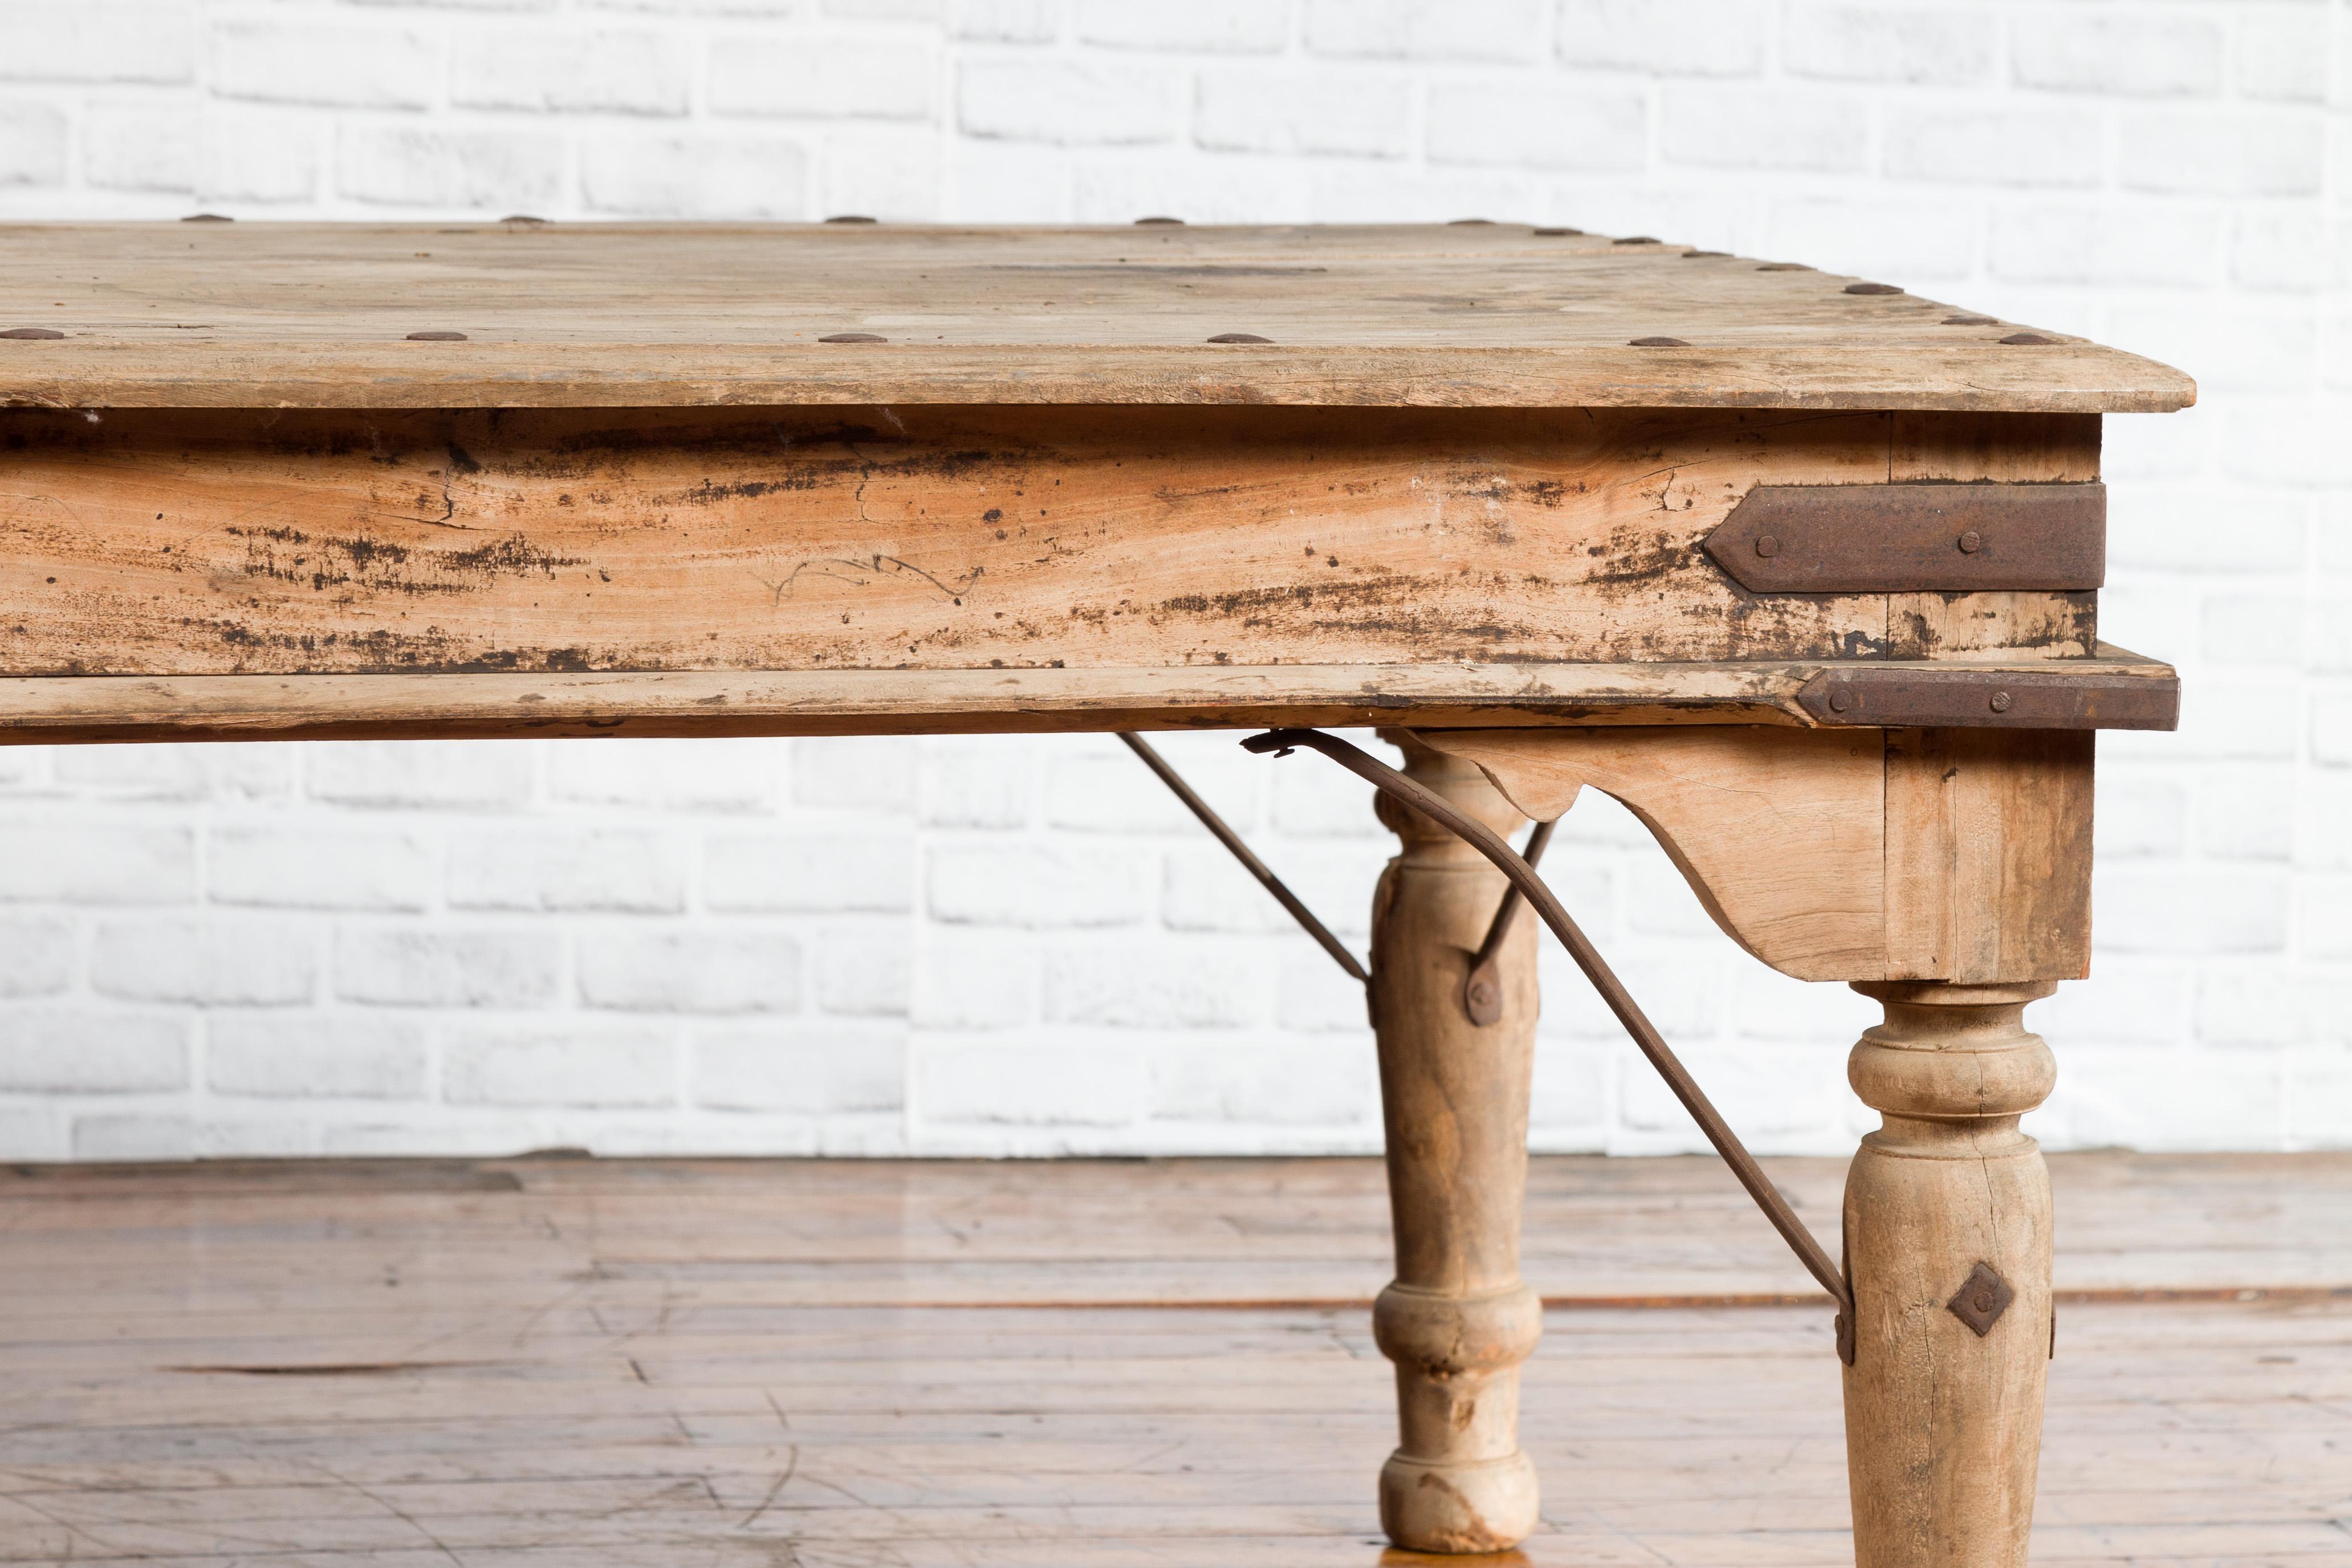 Rustic Indian Low Table with Distressed Patina, Iron Details and Baluster Legs For Sale 3